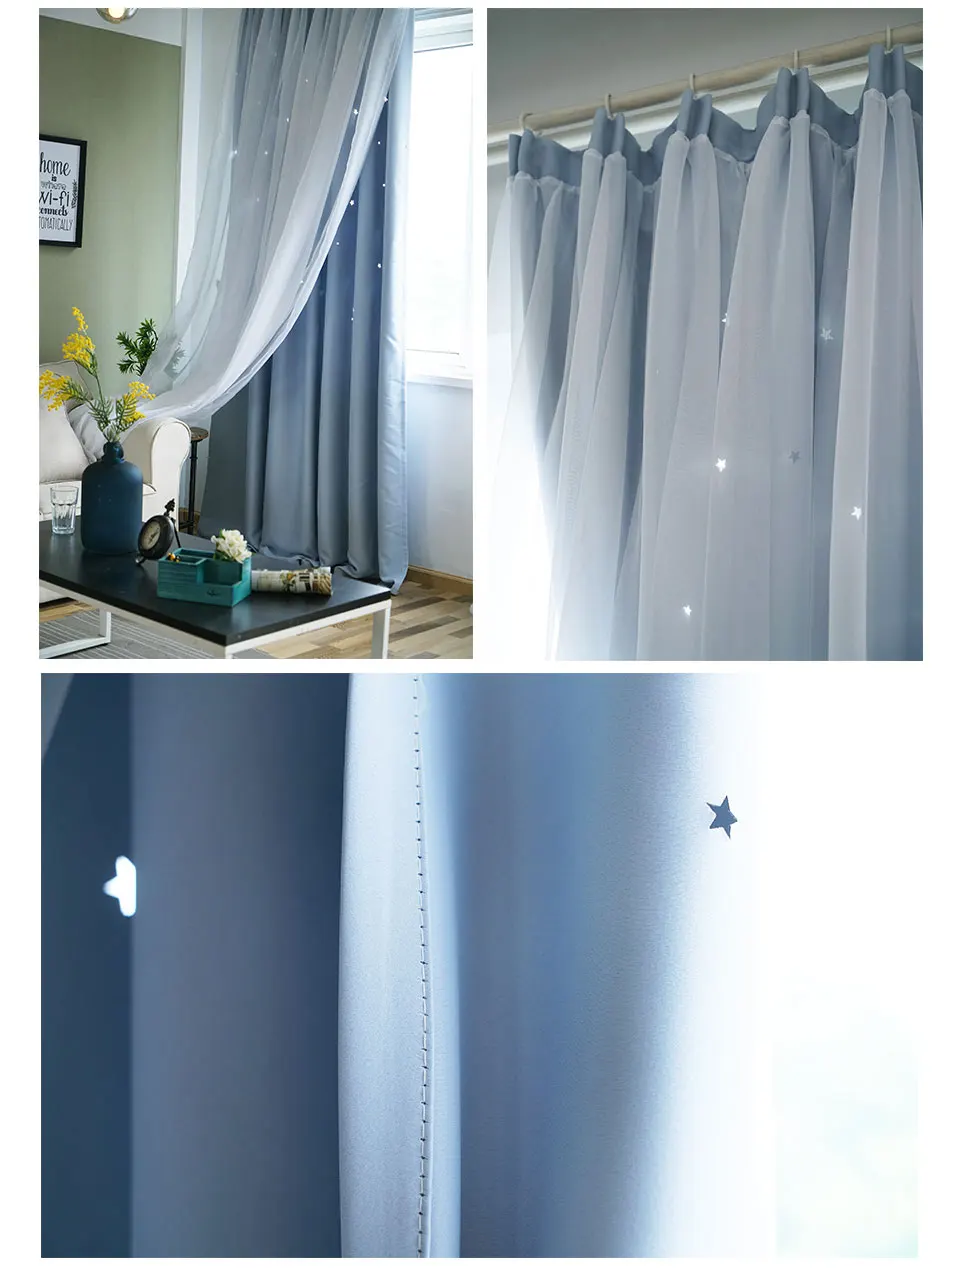 Blackout Curtains for Living room Pink Star Princess Girls Bedroom Window Treatment kids Door Curtains Fabric Drapes Cortinas